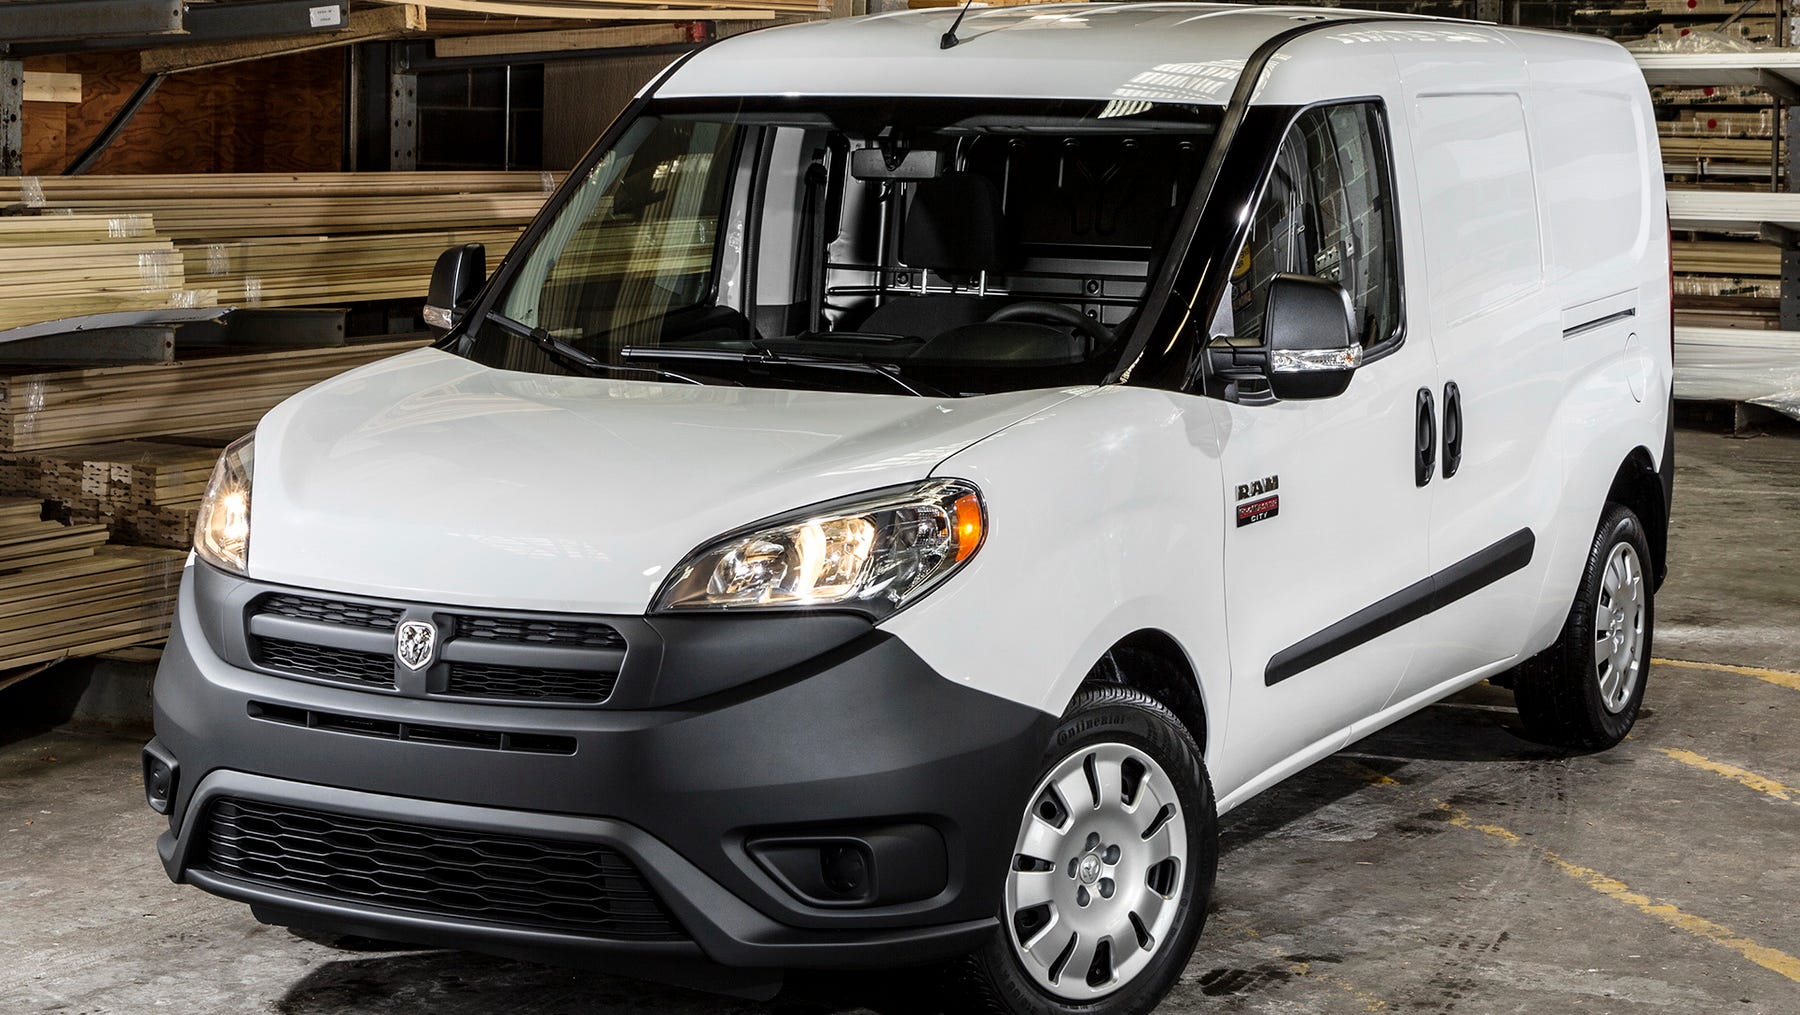 2015 Ram ProMaster City a new commercial option